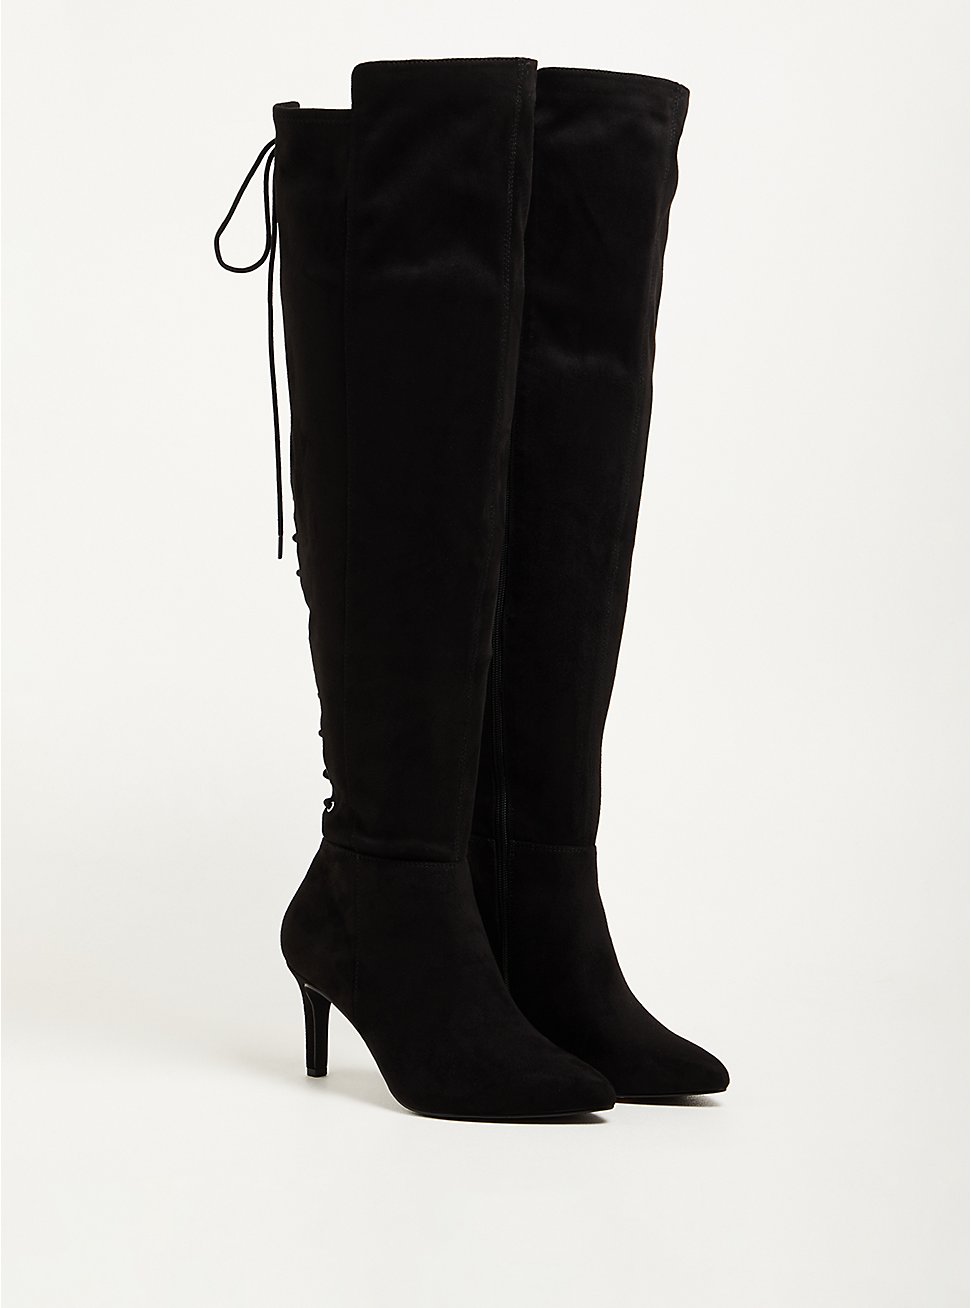 Stiletto Over The Knee Boot - Stretch Faux Suede Black, BLACK, hi-res